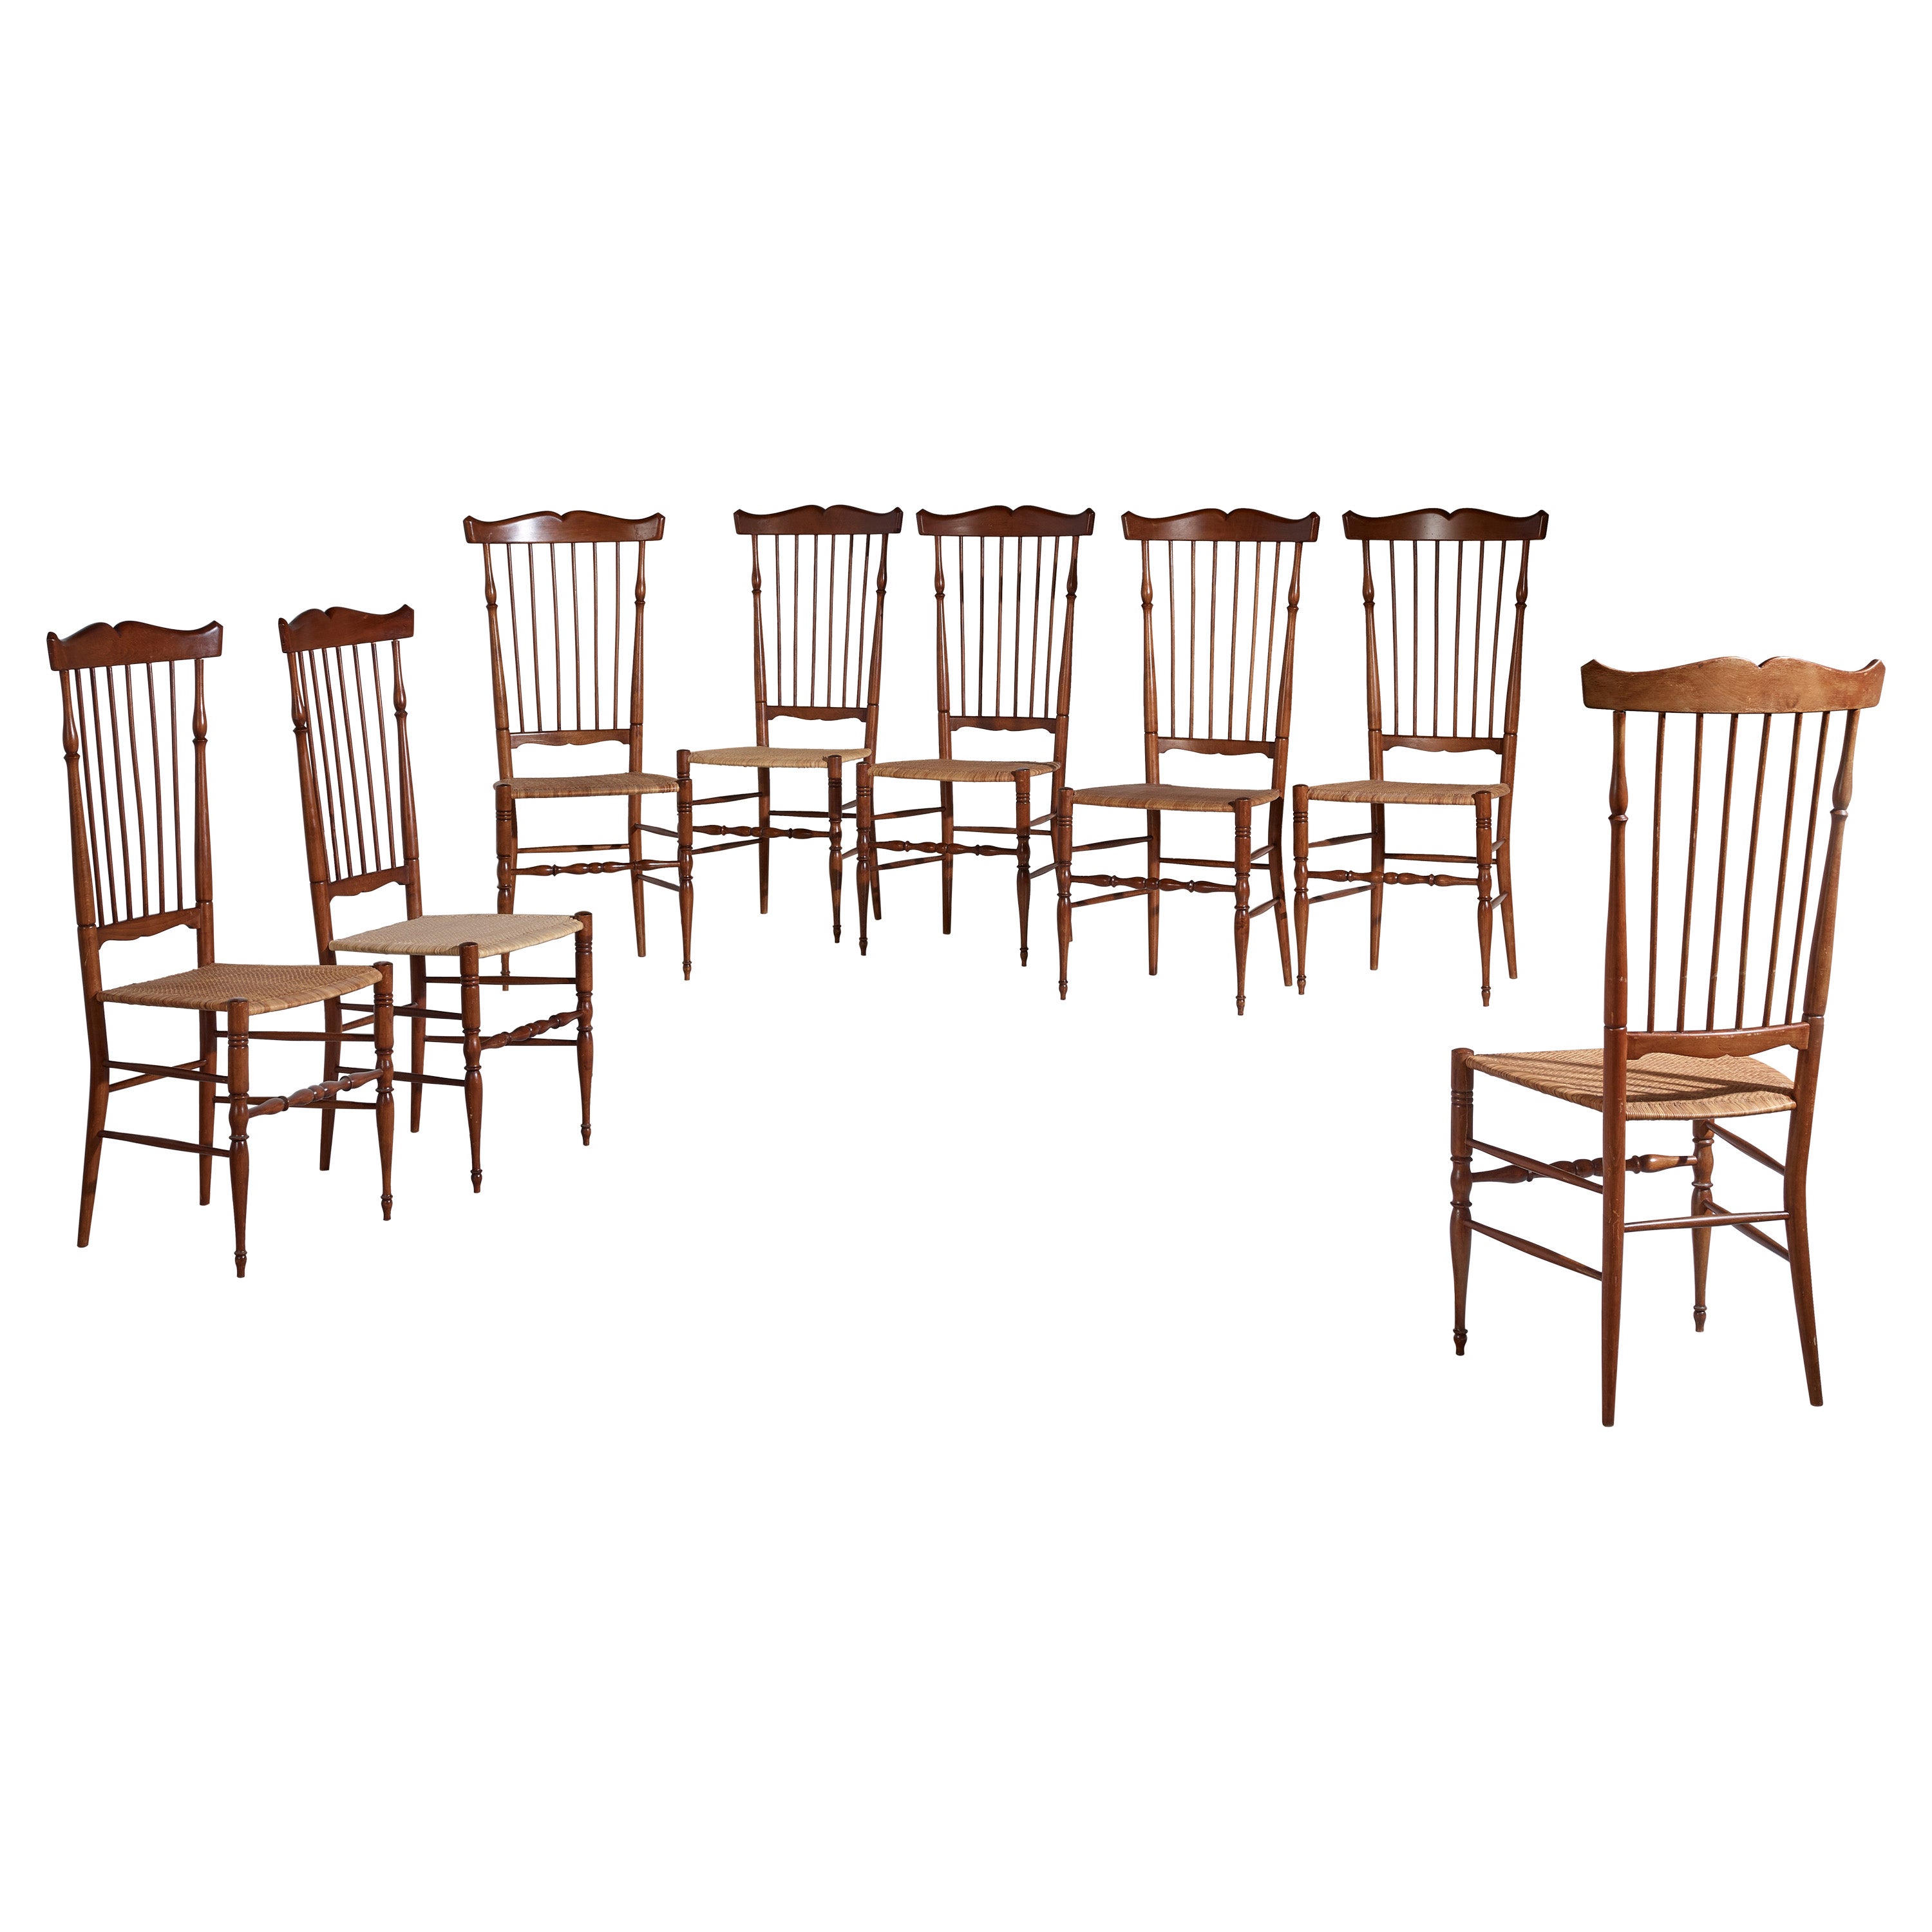 Sanguineti set of 8 high back 'Coloniale' dining chairs  - Chiavari, Italy 1960s